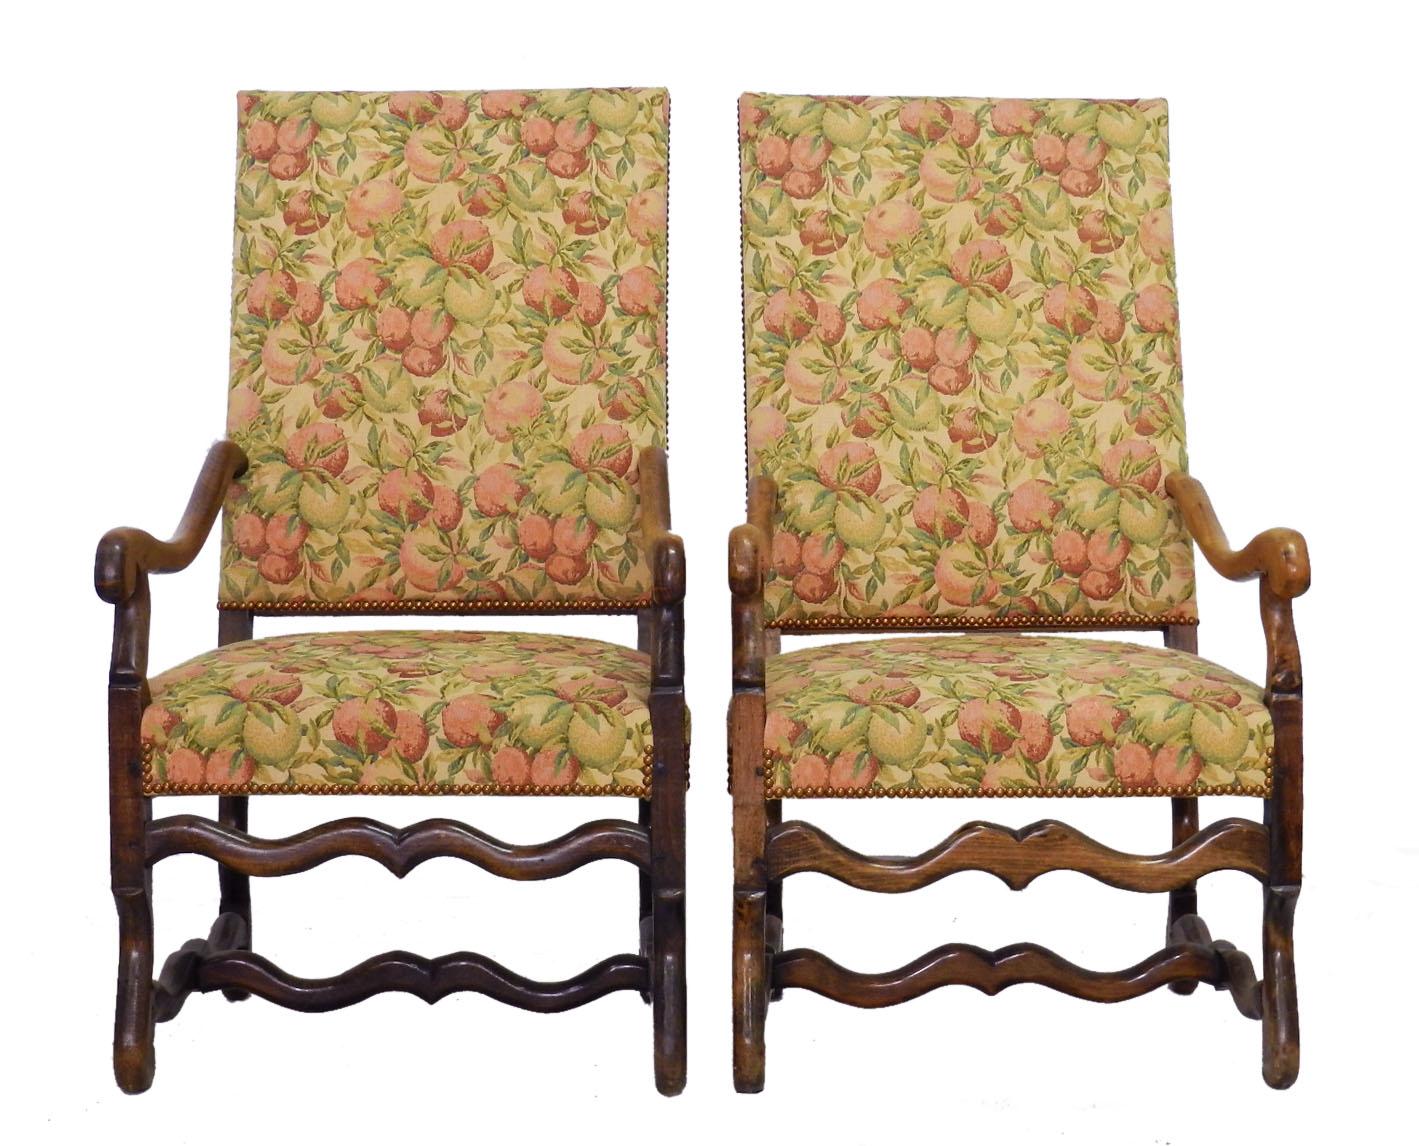 Pair of Os de Mouton armchairs French late 19th century throne chairs walnut
Open armchairs
Upholstered in good condition cotton linen print top covers easily changed to suit your interior
Solid walnut beautiful patina the arms have a lovely age